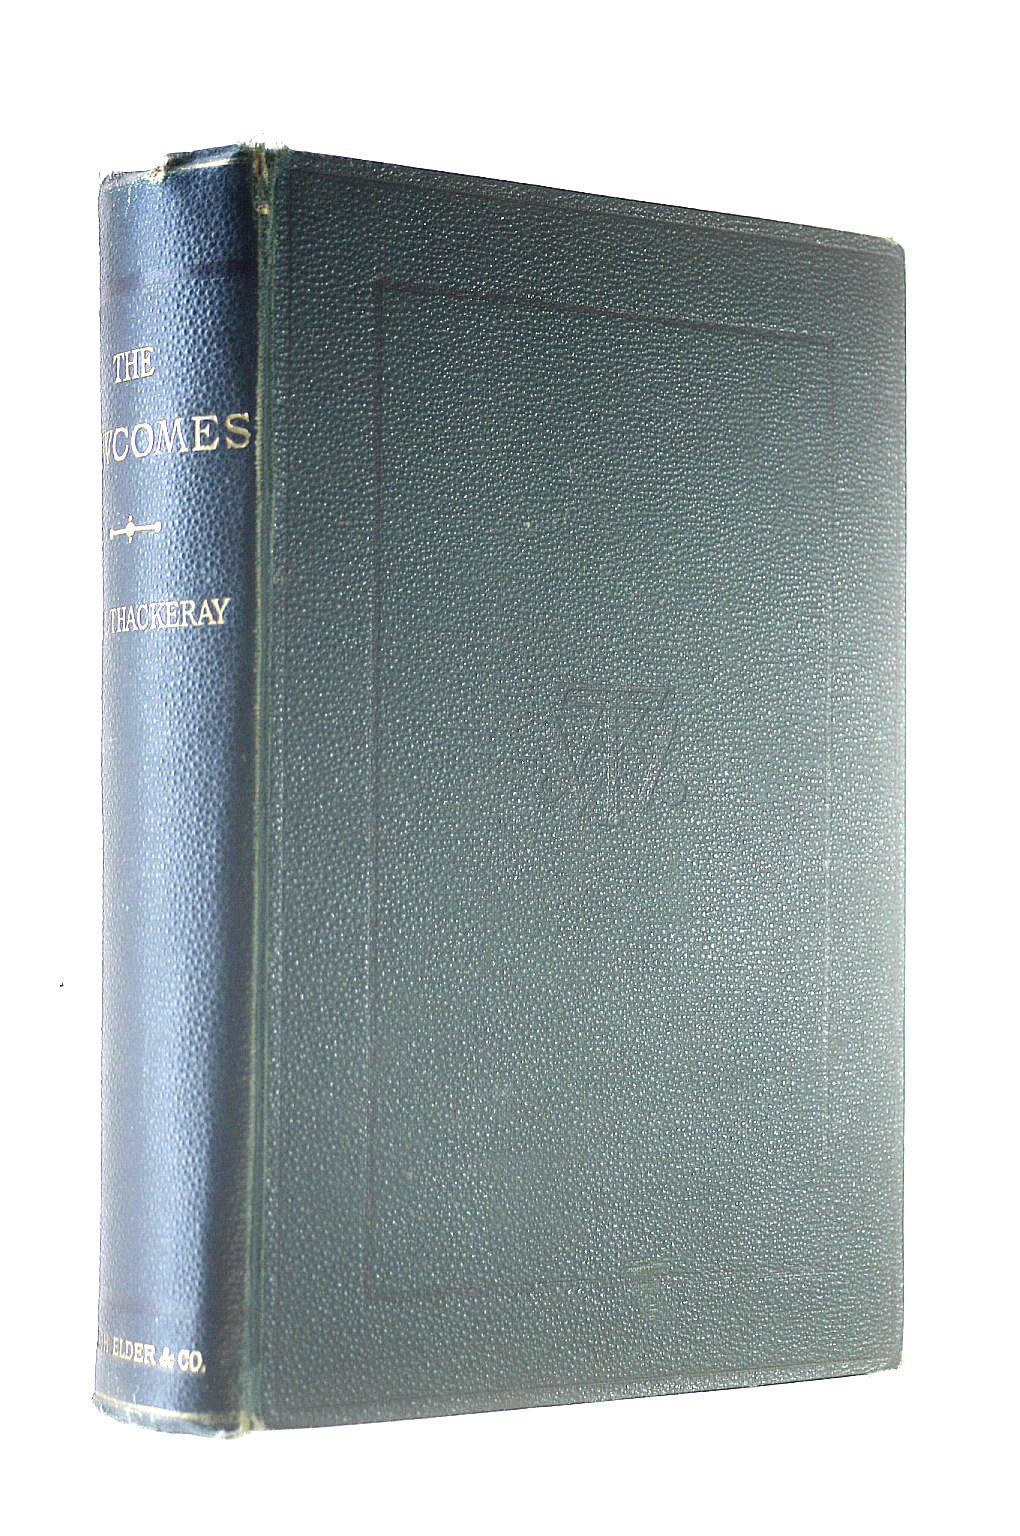 THACKERAY W M - Newcomes: memoirs of a most respectable family [Volume III of The works of William Makepeace Thackeray]